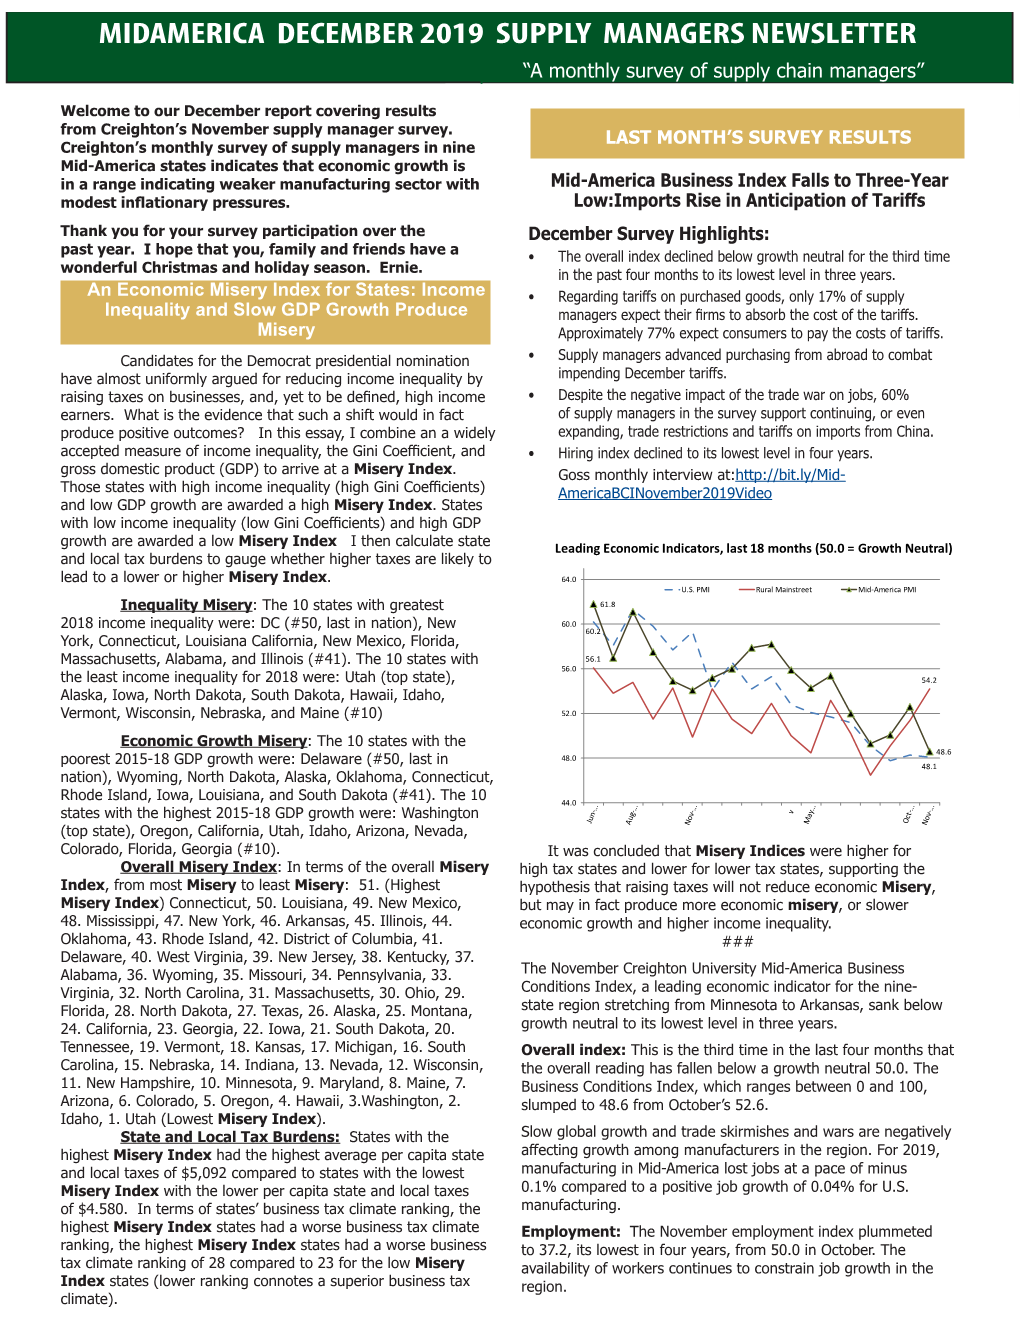 MIDAMERICA DECEMBER 2019 SUPPLY MANAGERS NEWSLETTER “A Monthly Survey of Supply Chain Managers”